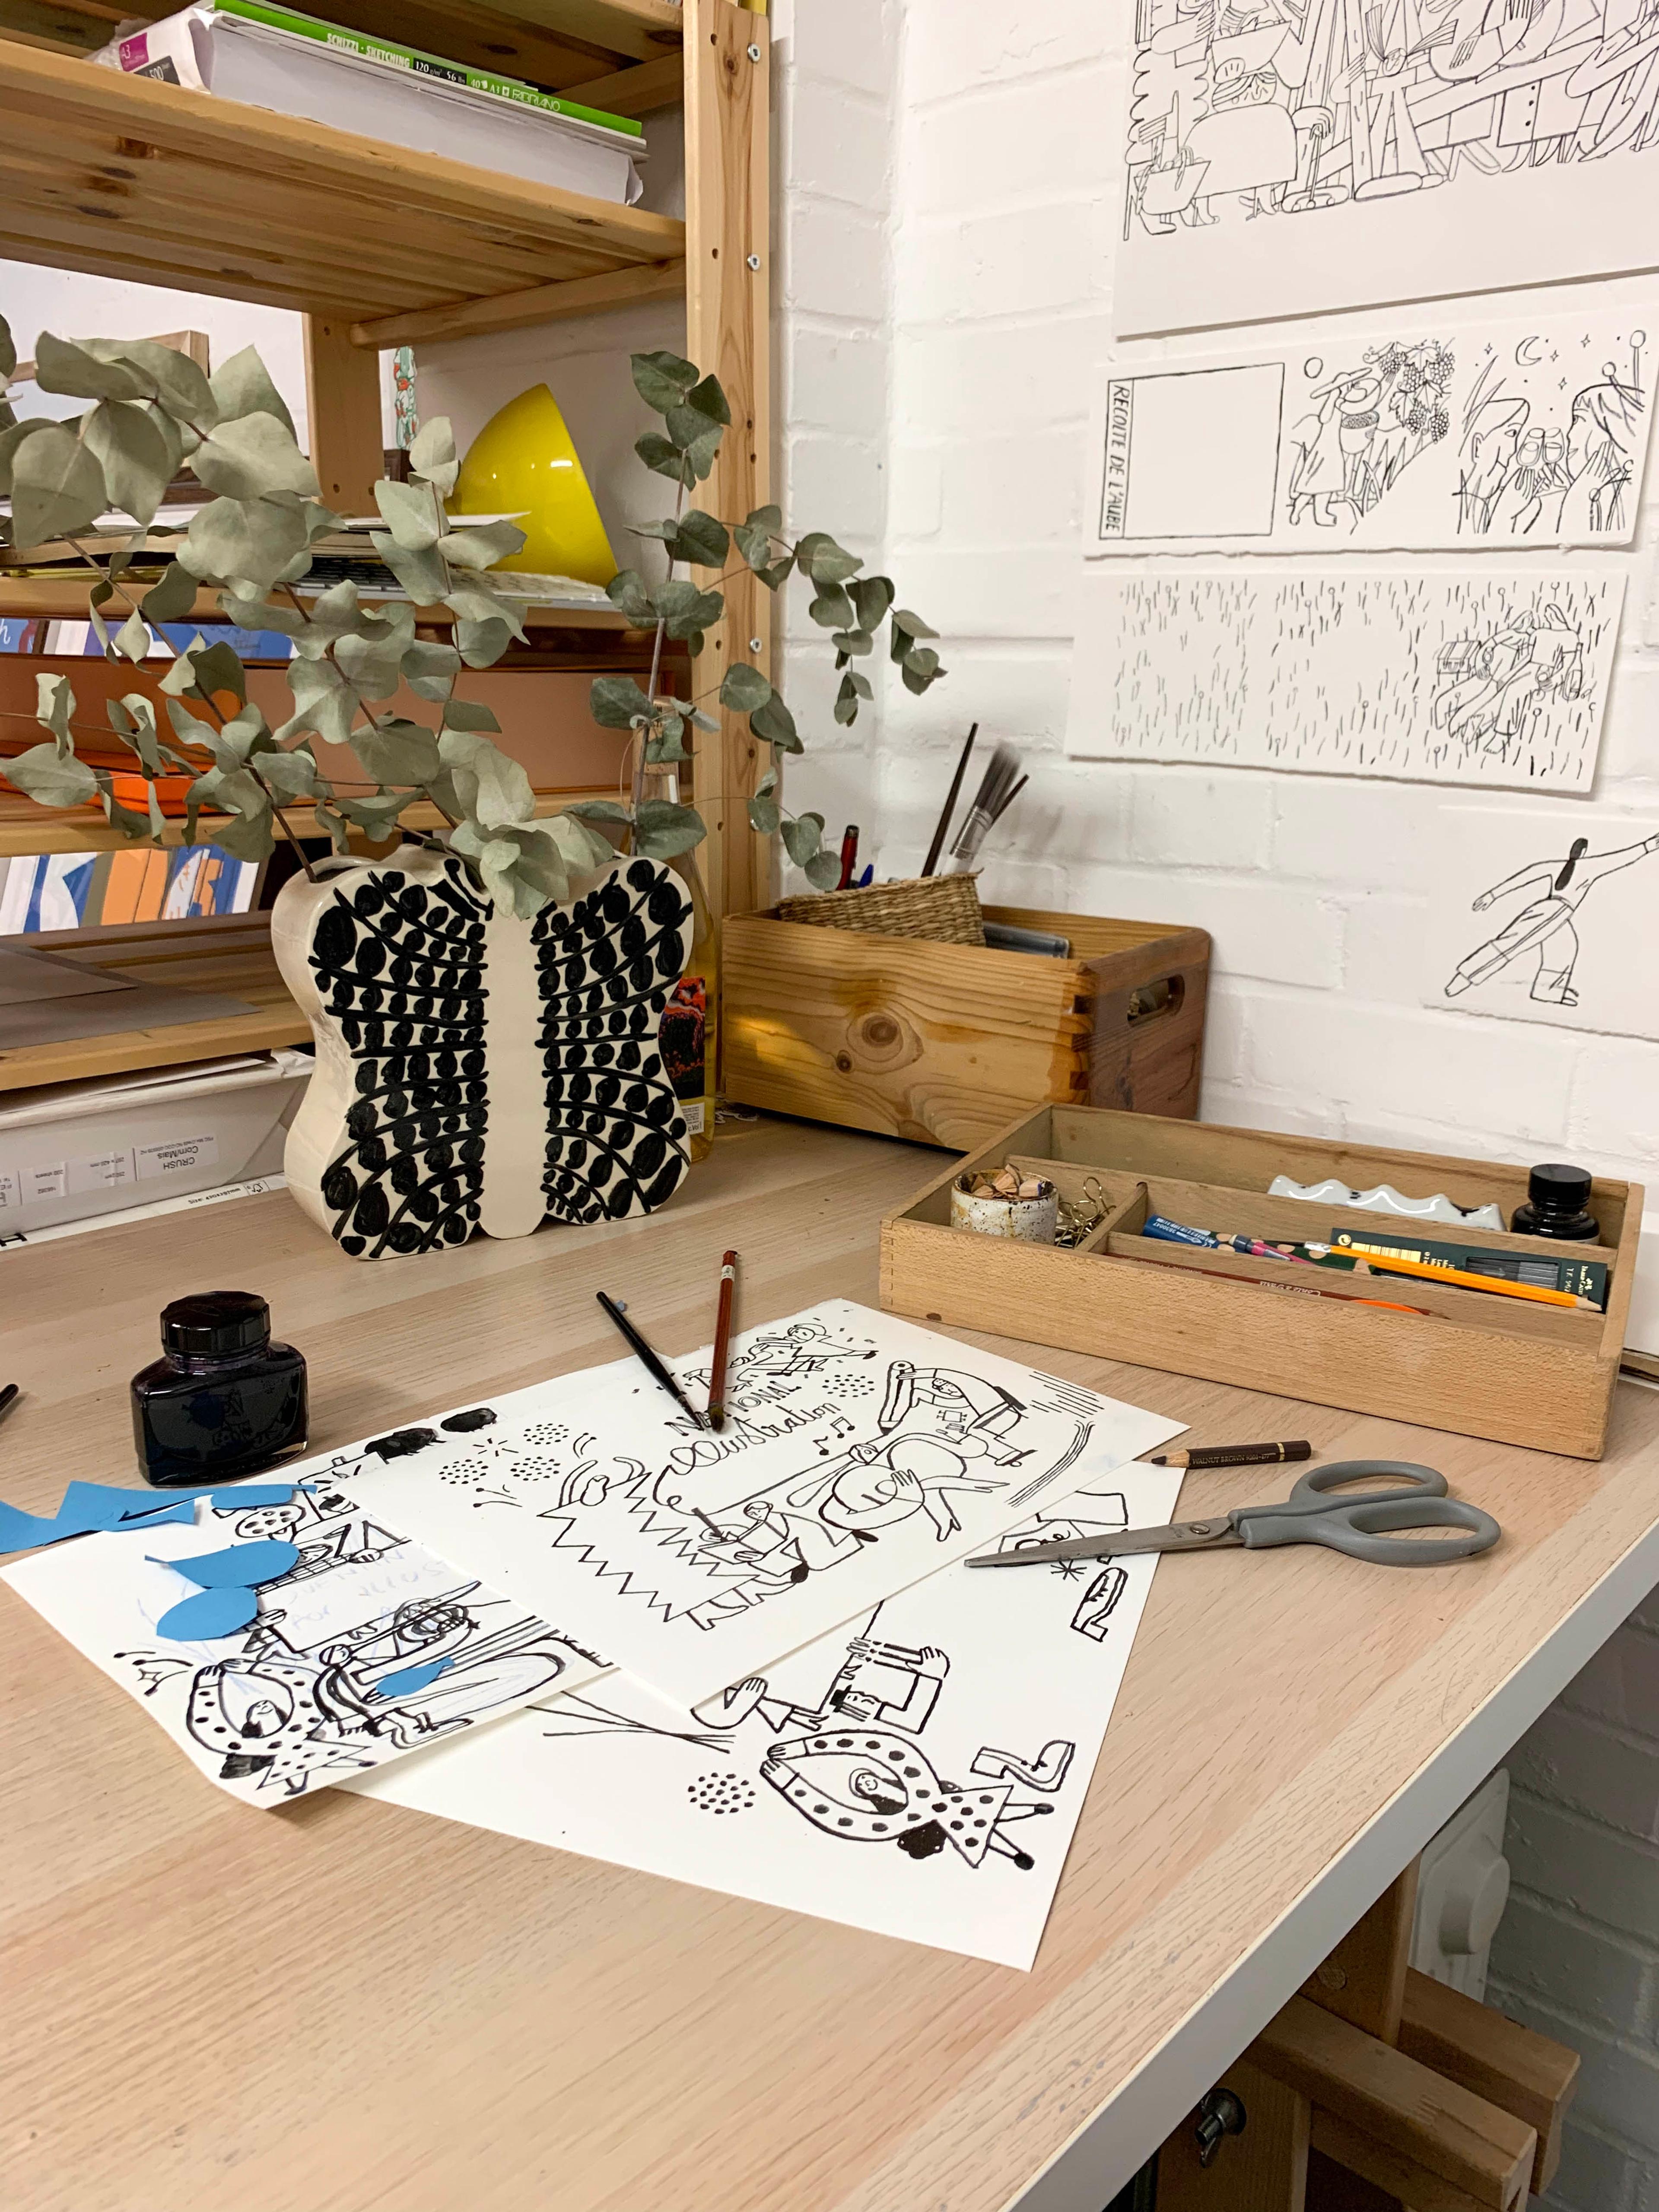 A photograph of a studio desk with illustrations on the table, with scissors, pens and ink.